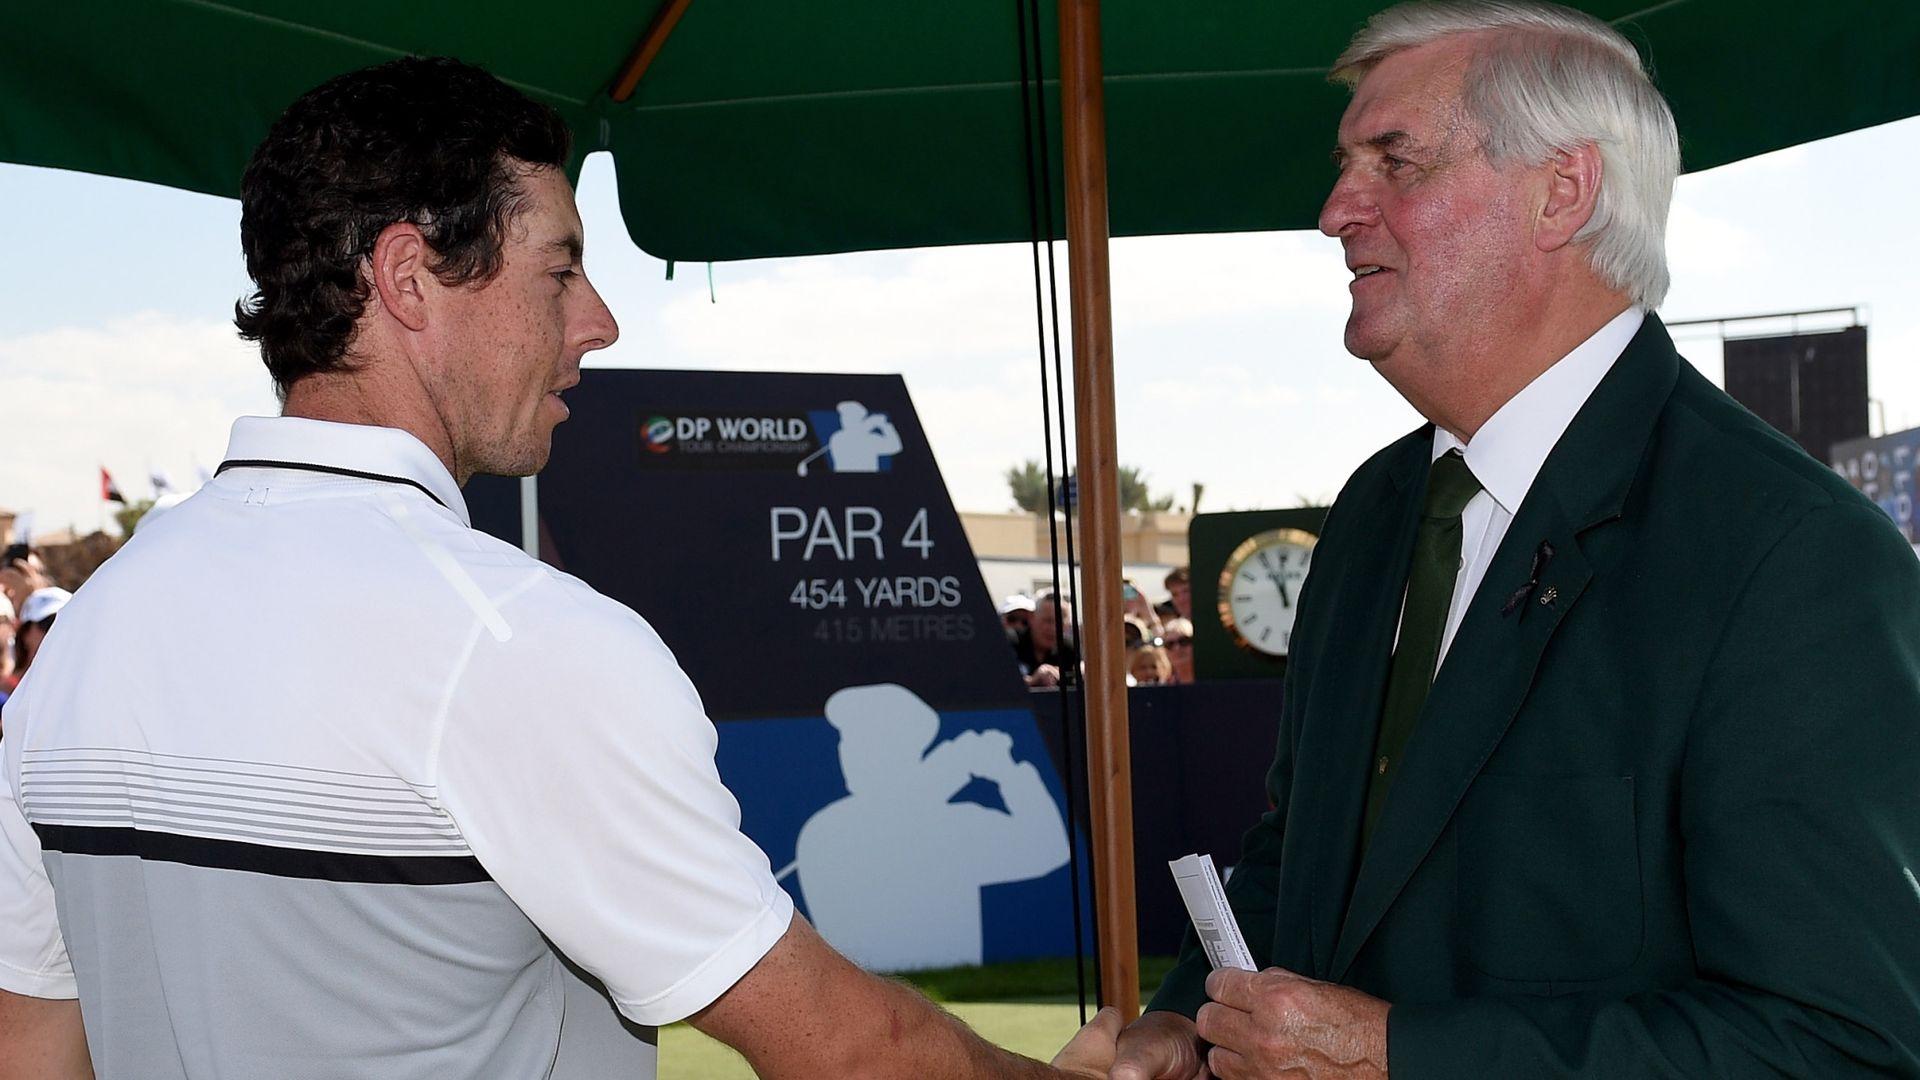 Tributes paid as 'voice of The Open' Robson dies